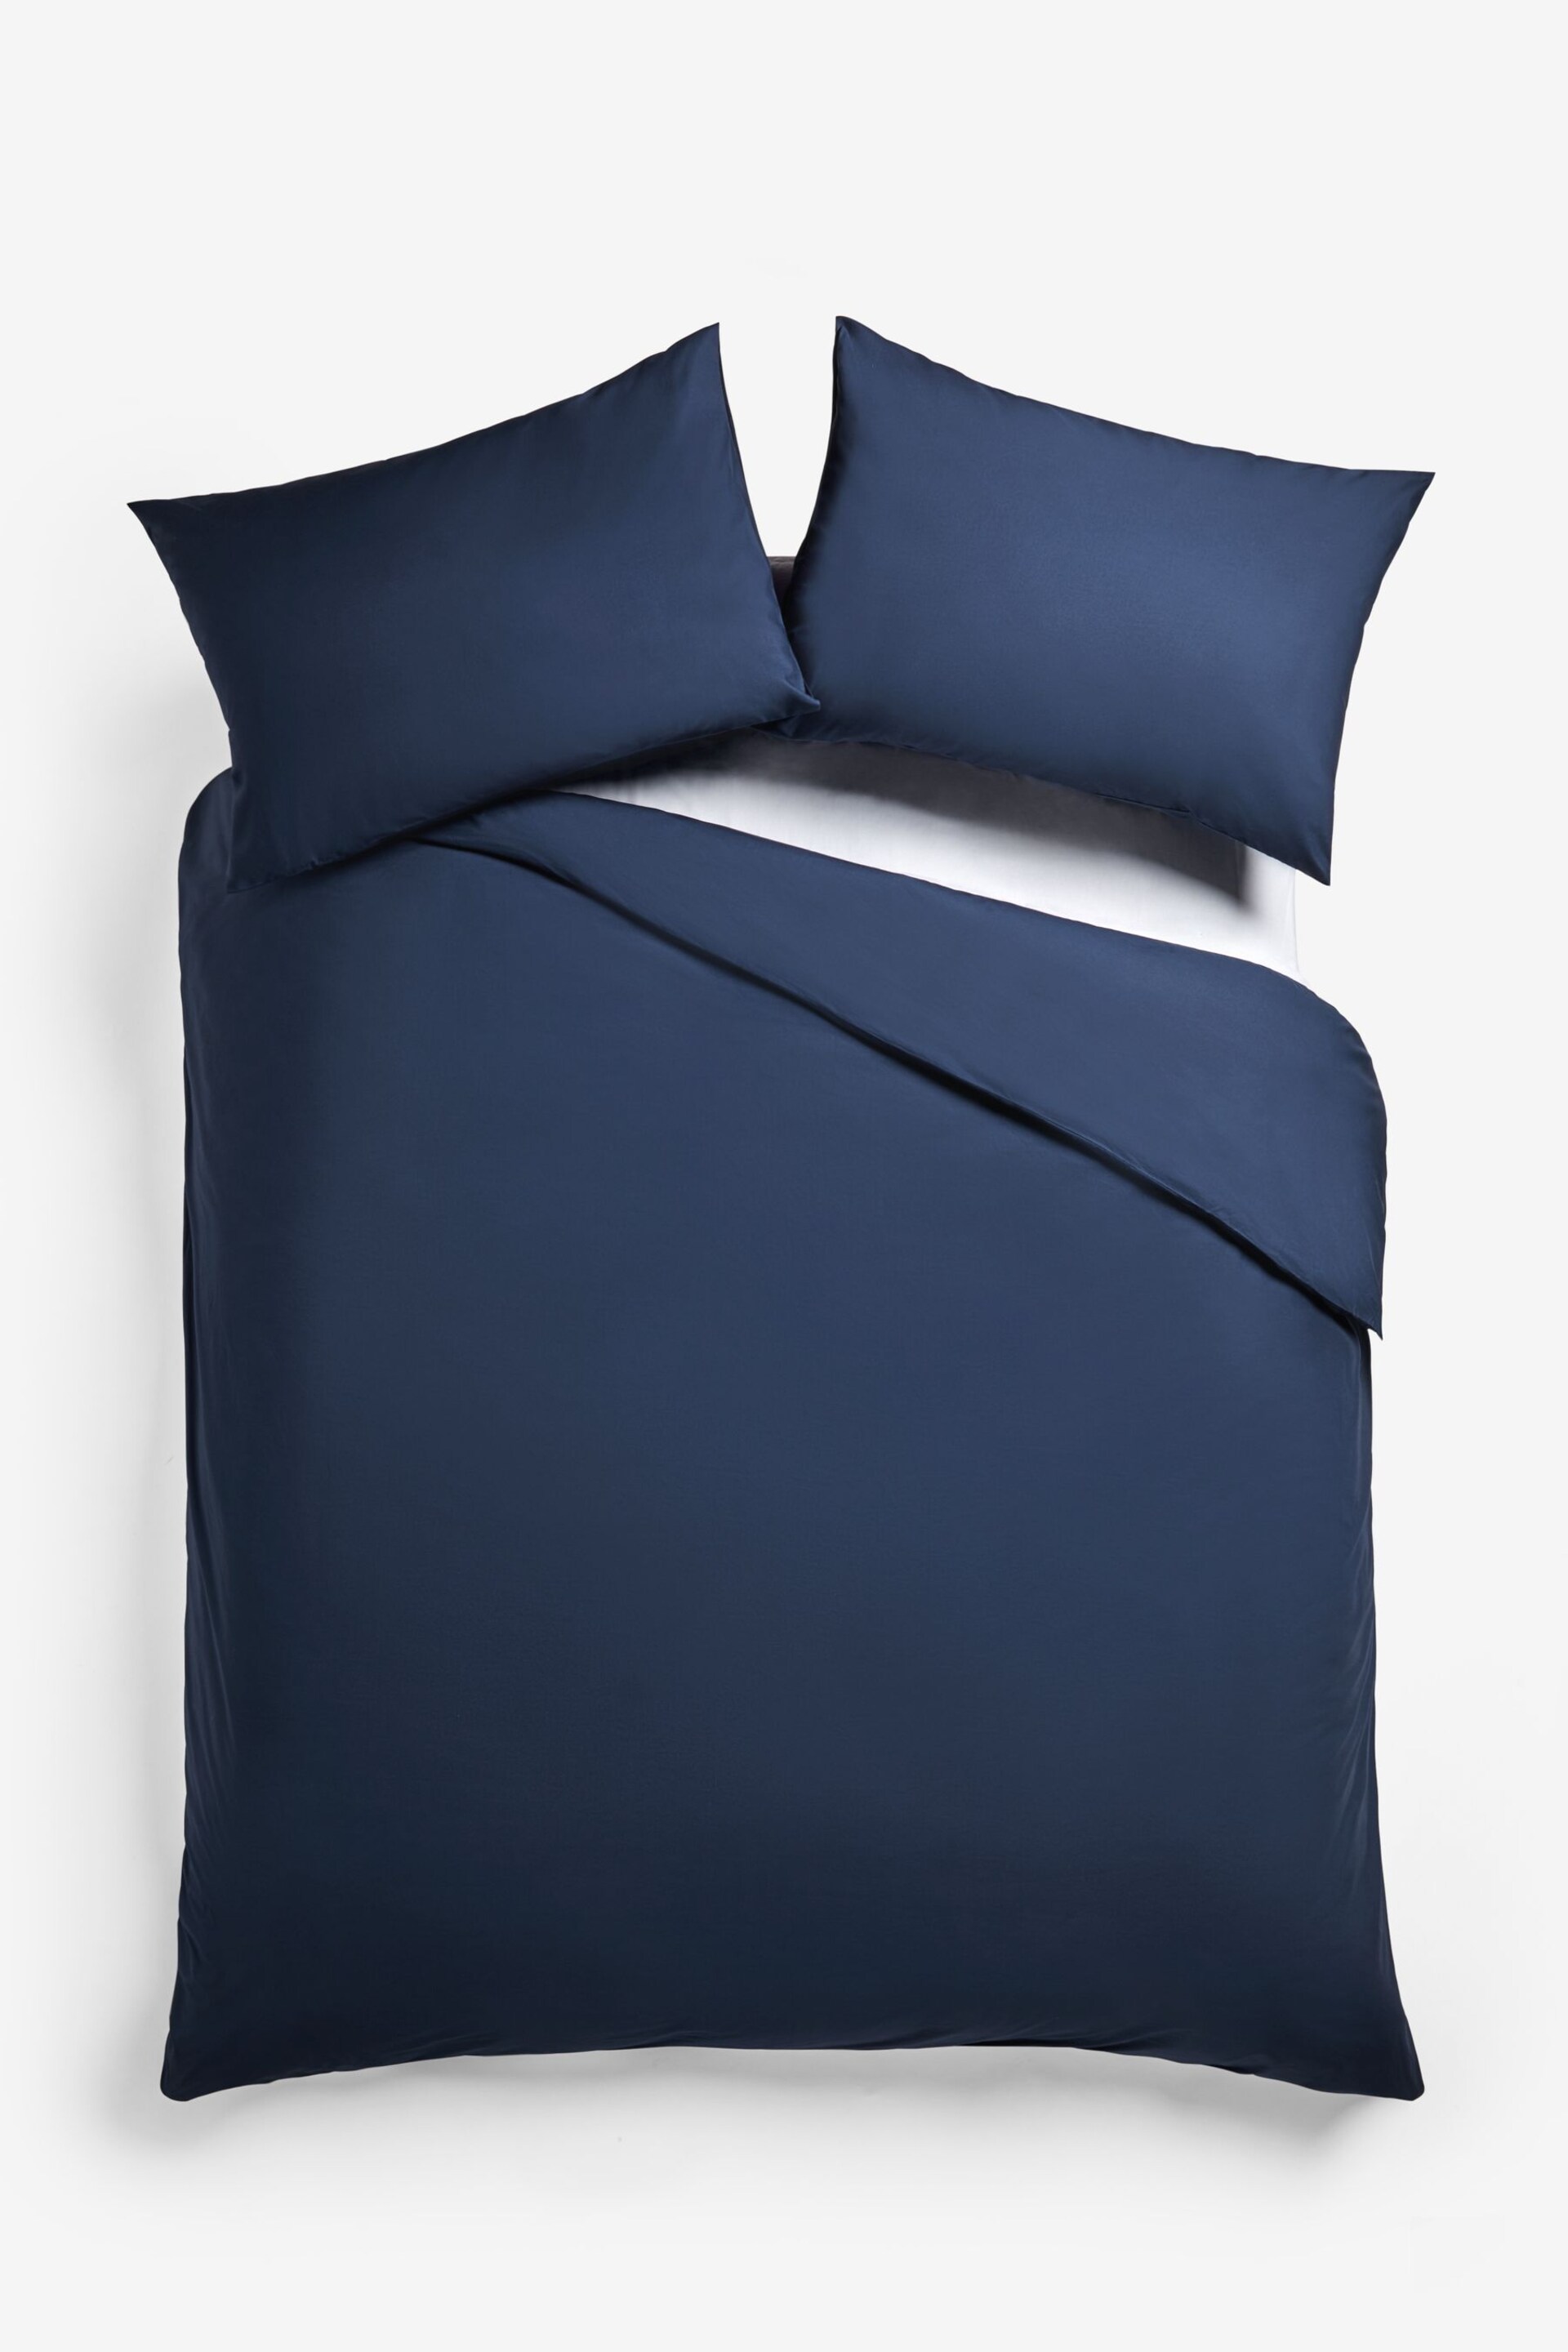 Navy Blue Collection Luxe 200 Thread Count 100% Egyptian Cotton Percale Duvet Cover And Pillowcase Set - Image 4 of 5